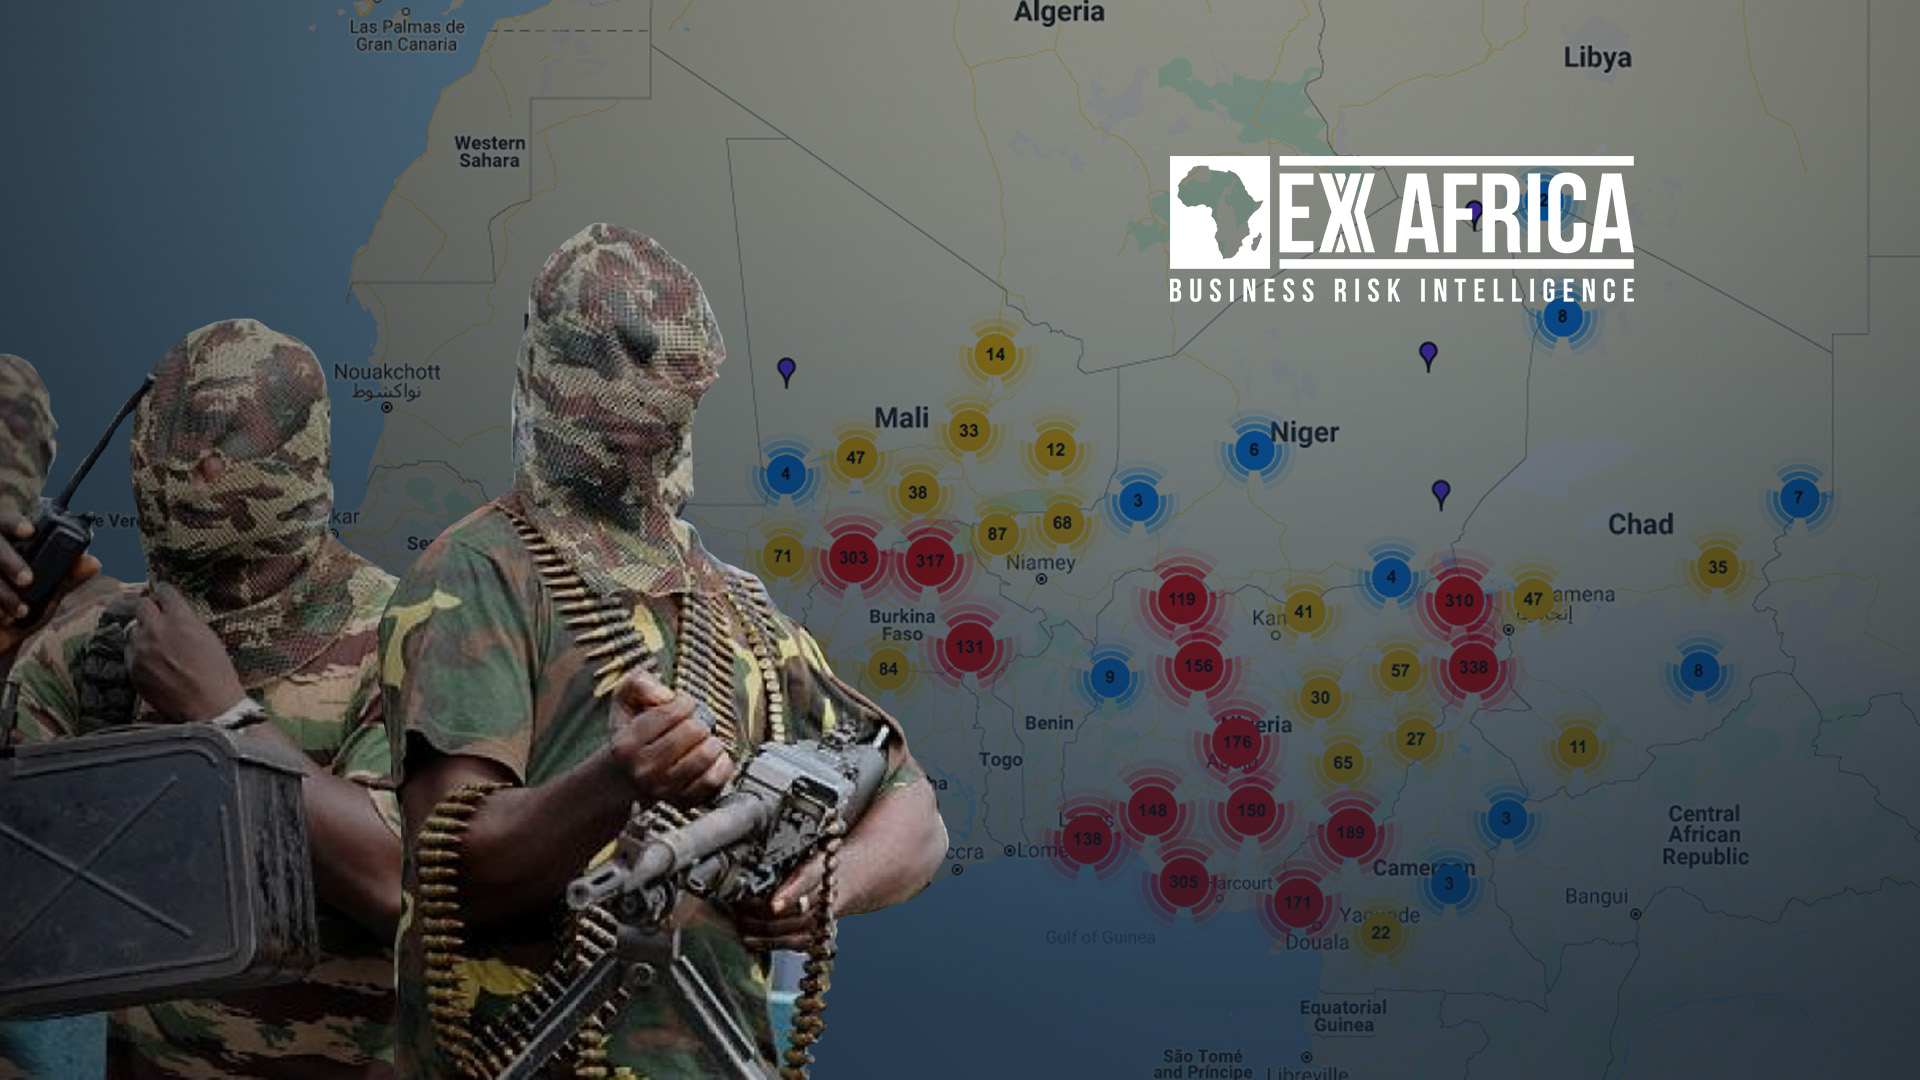 WEST AFRICA: THE RESILIENCE OF BOKO HARAM AND ISLAMIC STATE